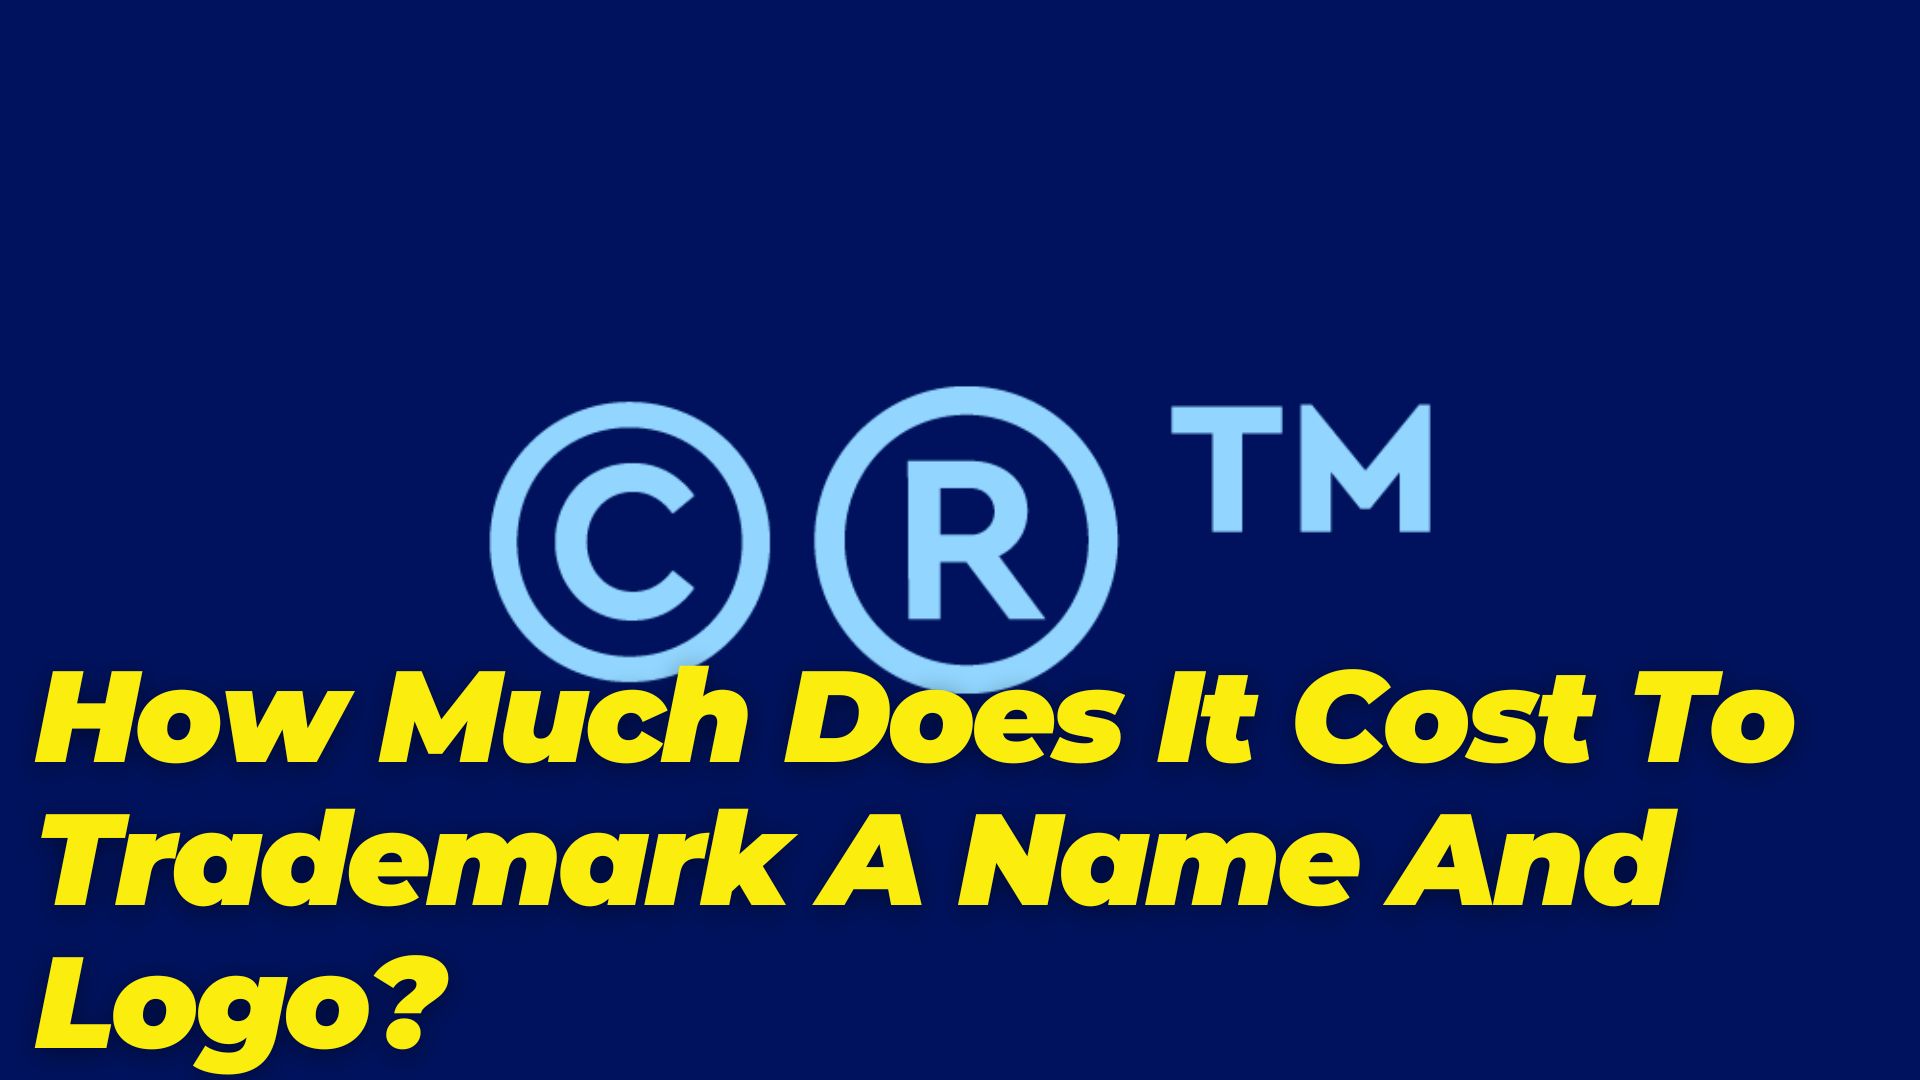 How Much Does It Cost To Trademark A Name And Logo?